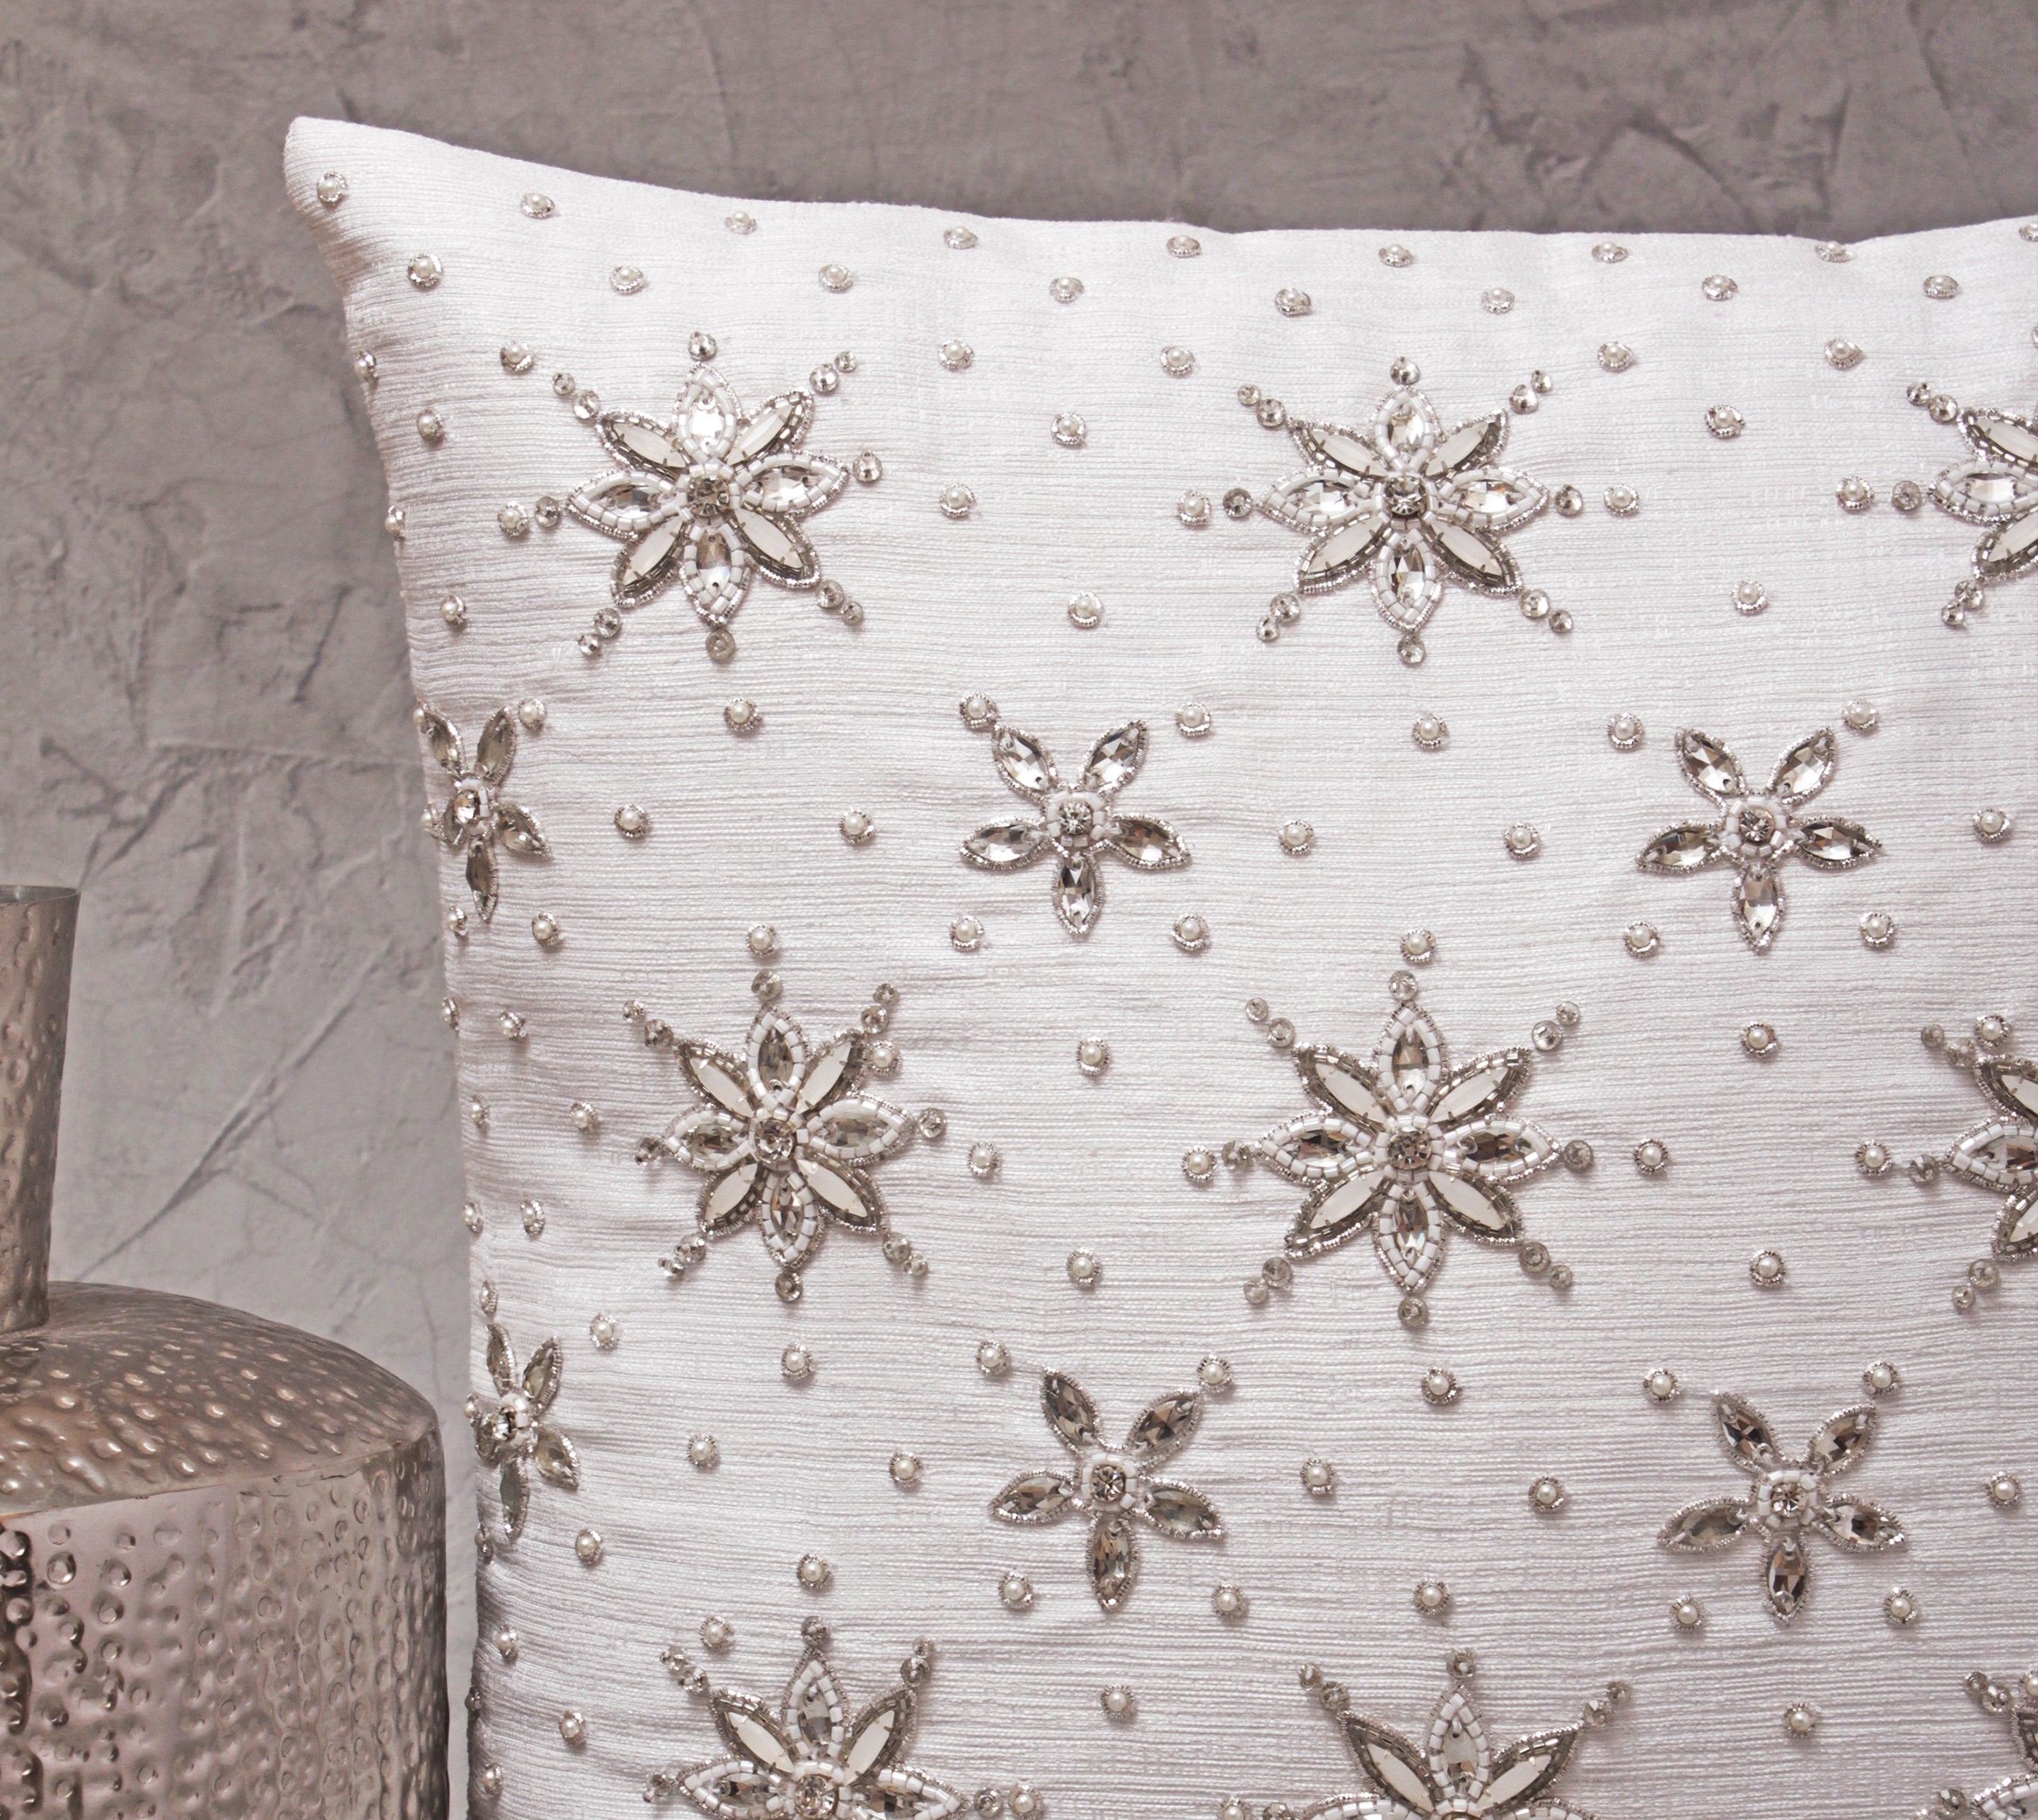 White and Silver Cushion Cover